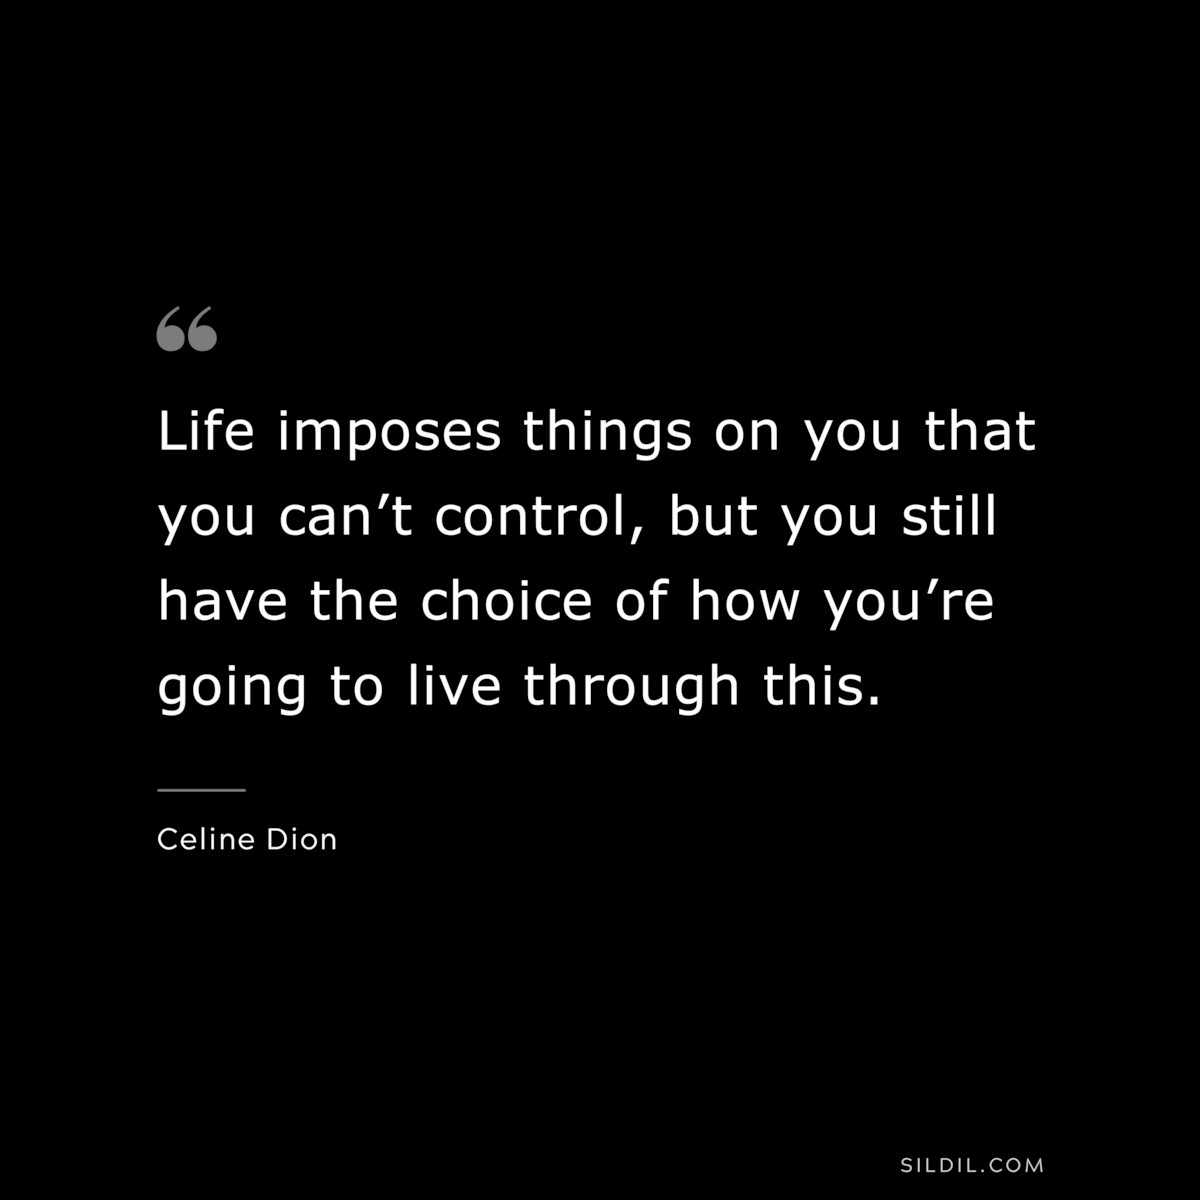 Life imposes things on you that you can’t control, but you still have the choice of how you’re going to live through this. ― Celine Dion